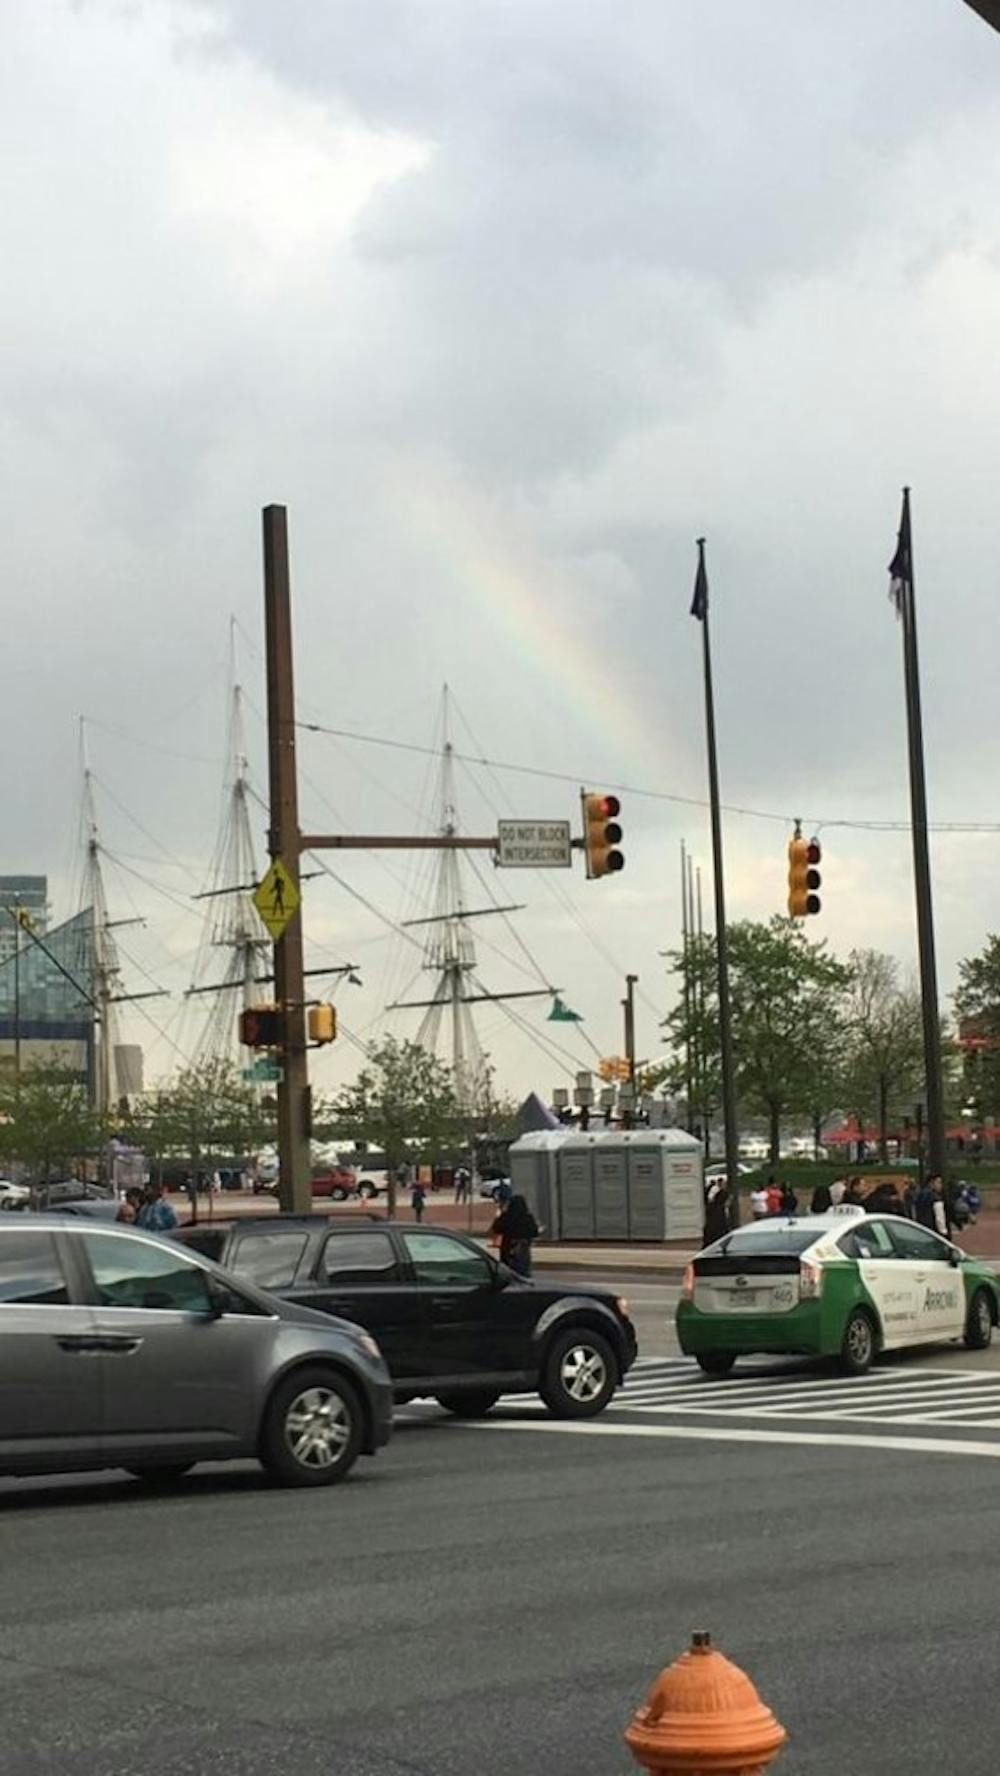 &nbsp;
COURTESY OF RENEE SCAVONE
A streetside view of shipmasts under a rainbow at the Inner Harbor.